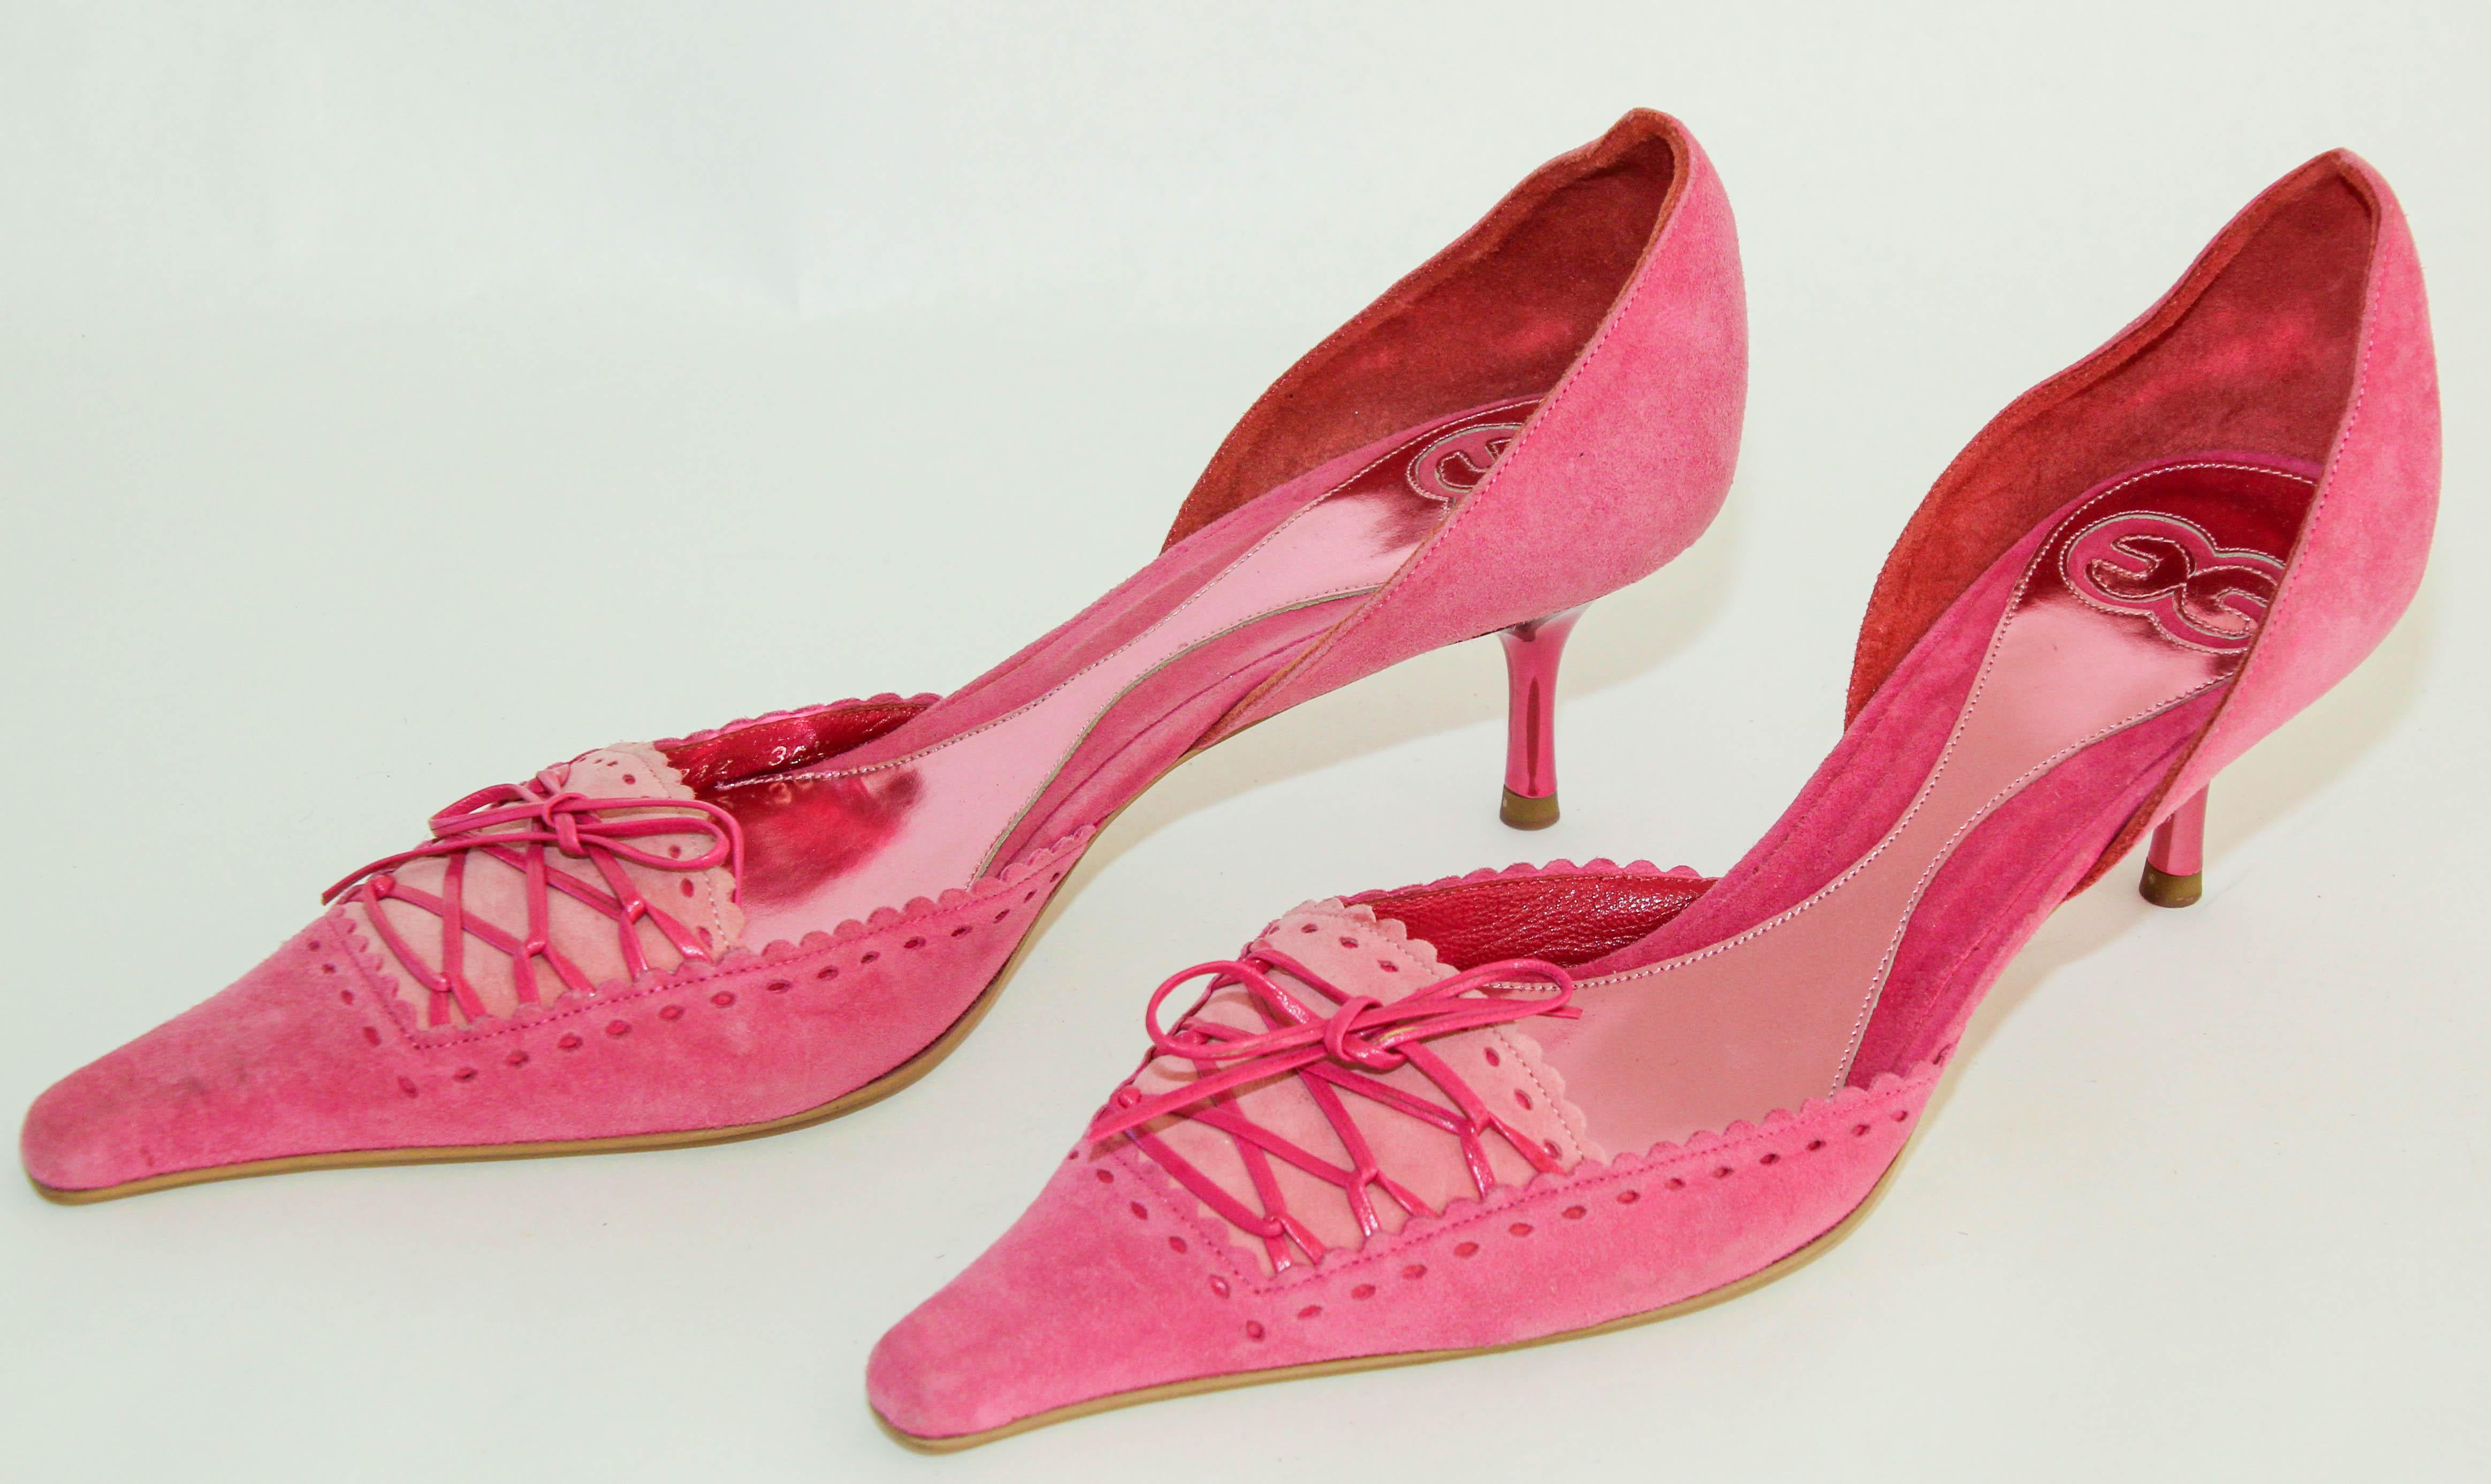 Escada Hot Pink Suede Pumps with Leather Details Size 36.5 Italy 9